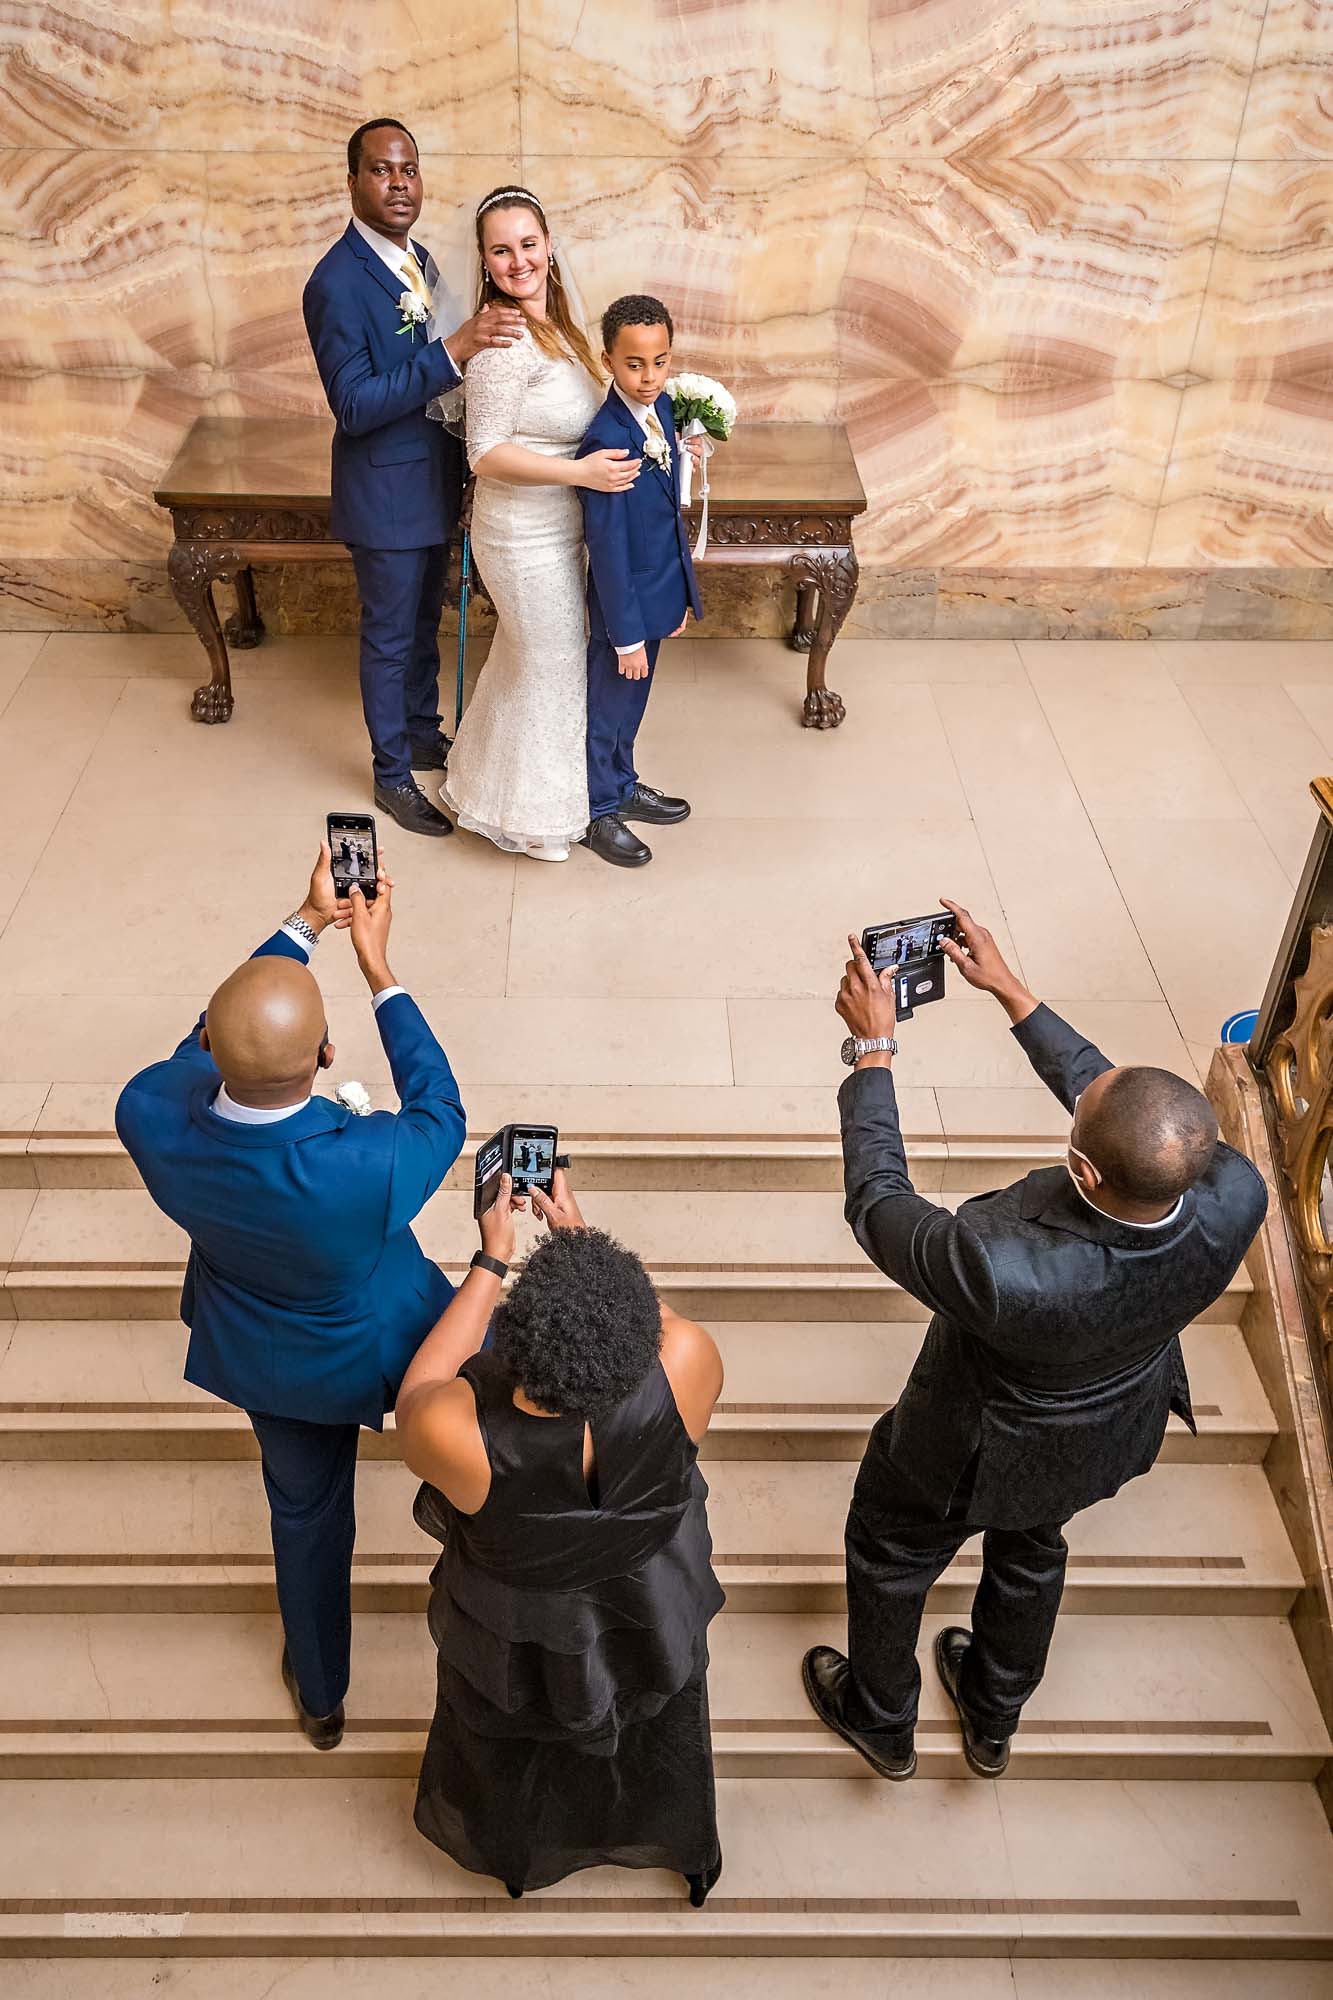 Capturing some guests taking posed photos of the couple on staircase